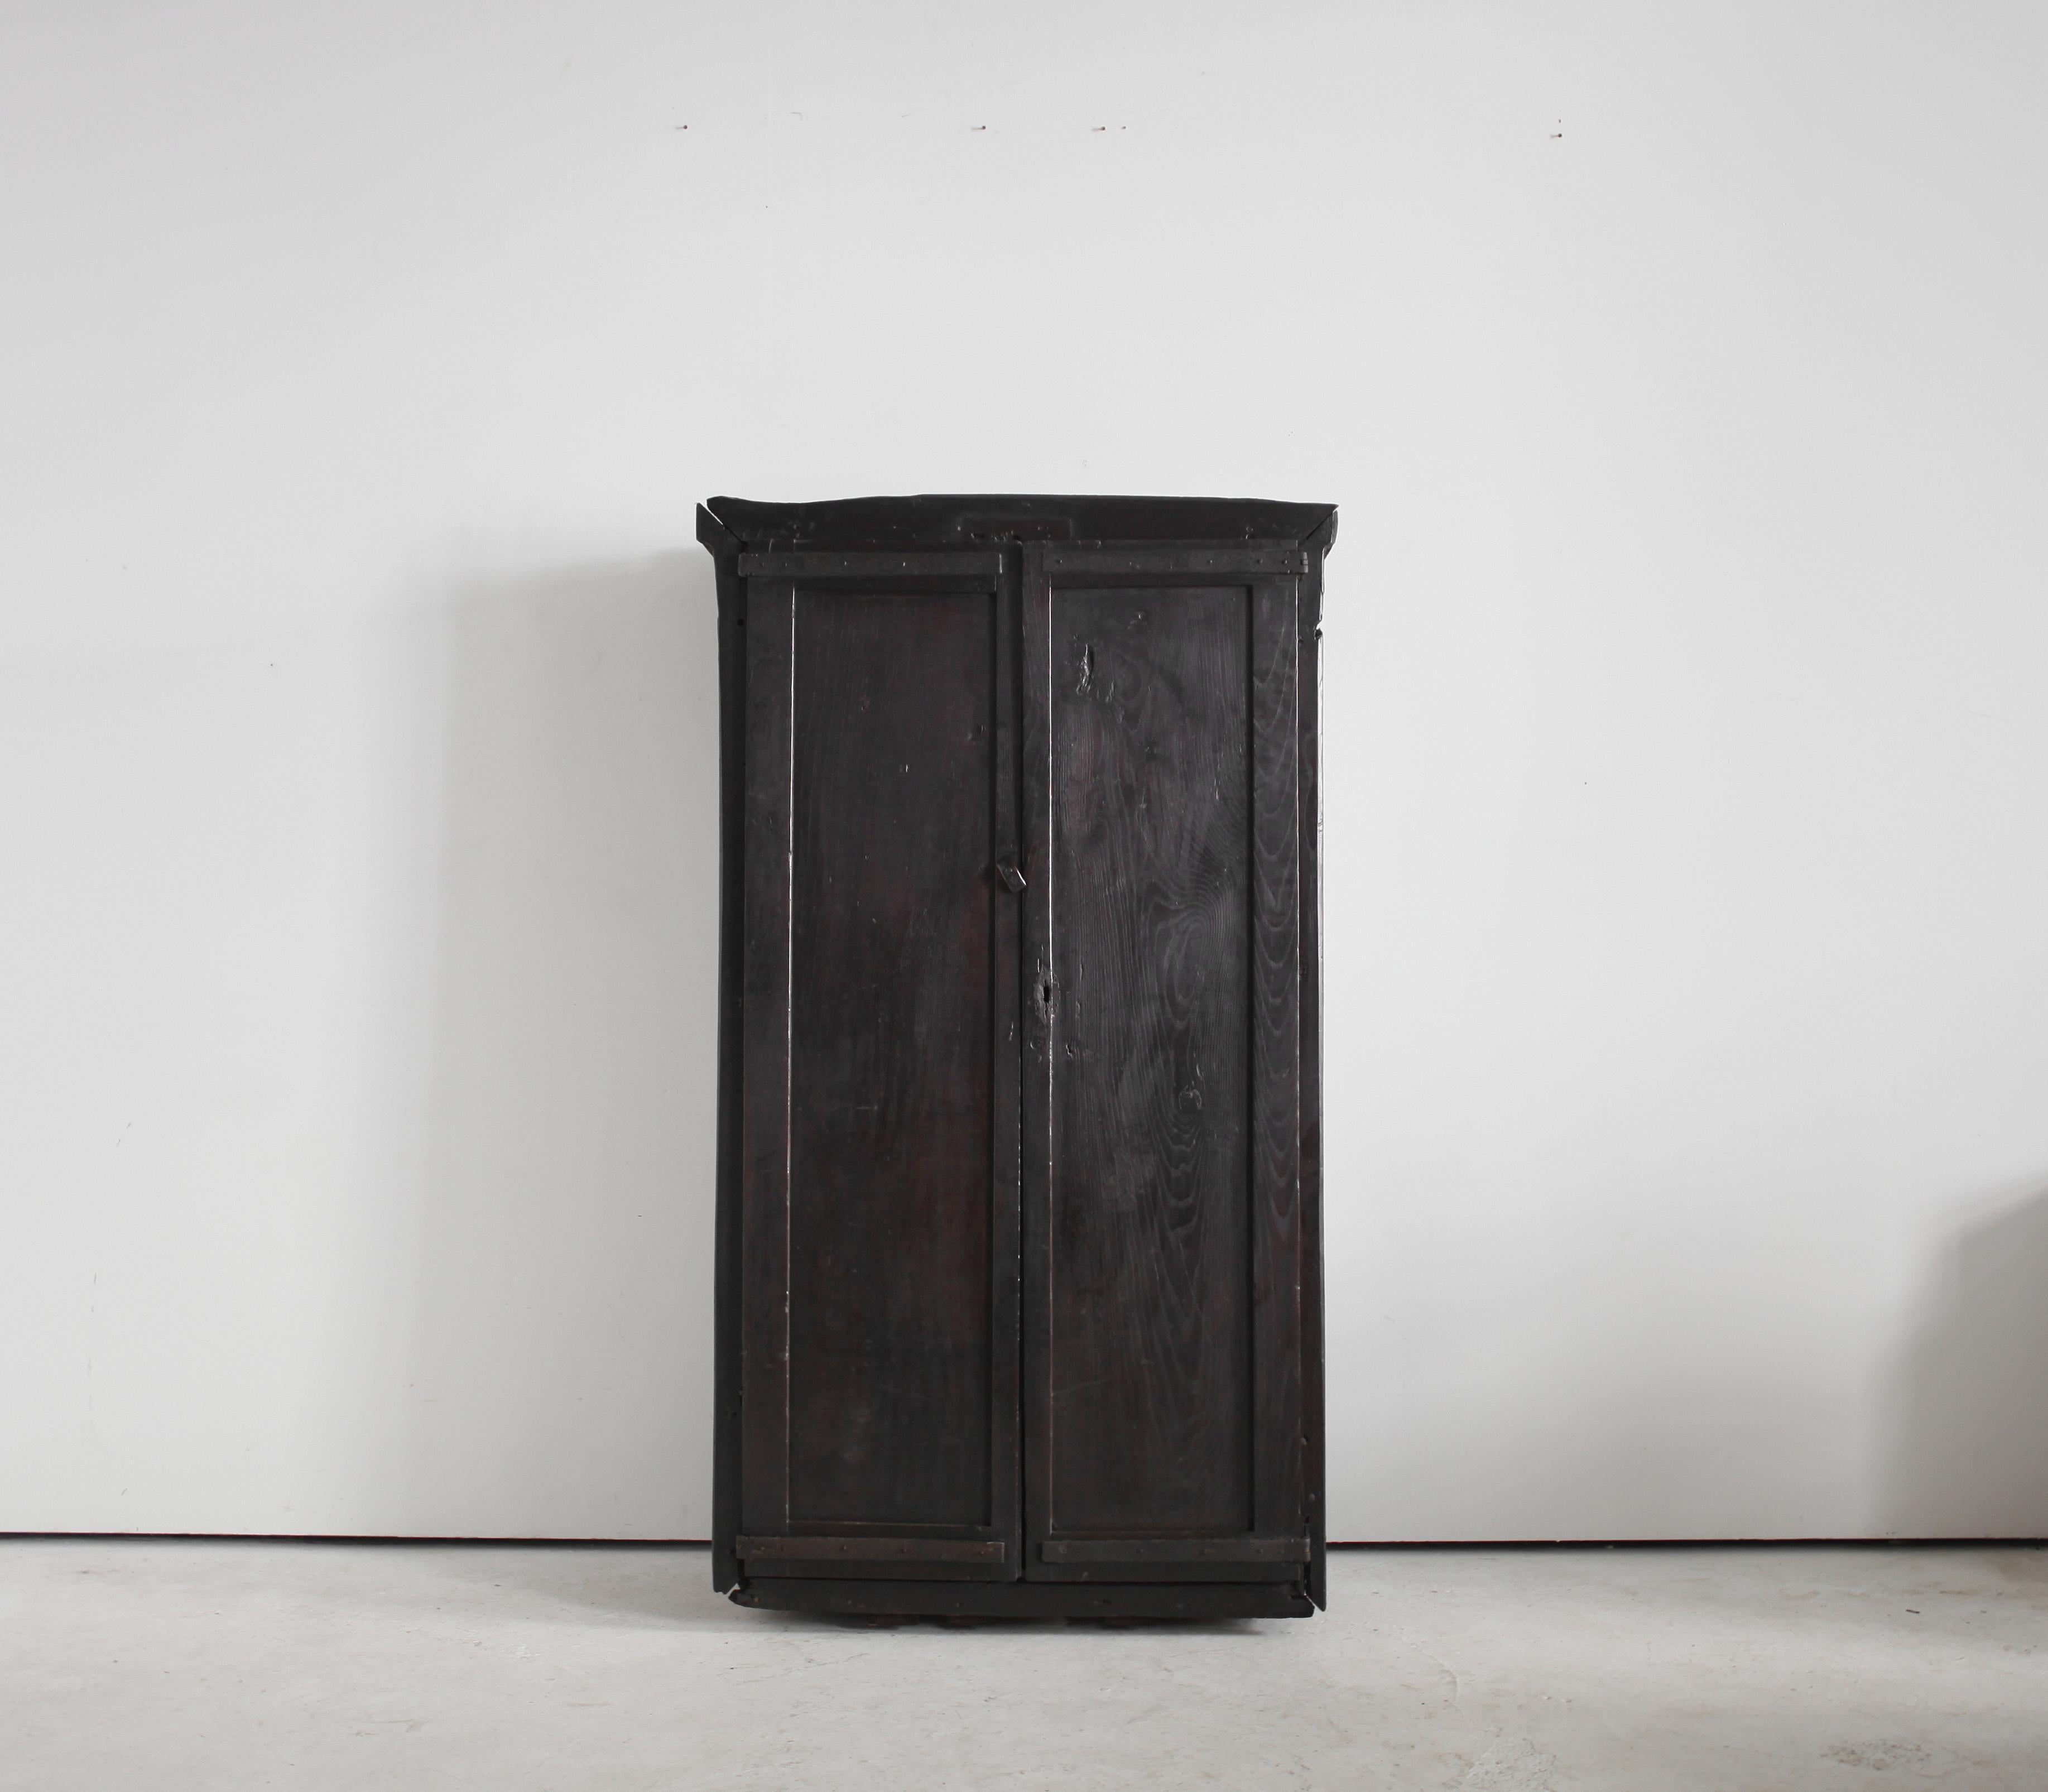 A large early 18th C. Hewn chestnut cupboard from the mountains of the Basque Country.

Primitively constructed with thick slabs of chestnut & hand forged iron hardware.

Three interior solid chestnut shelves.